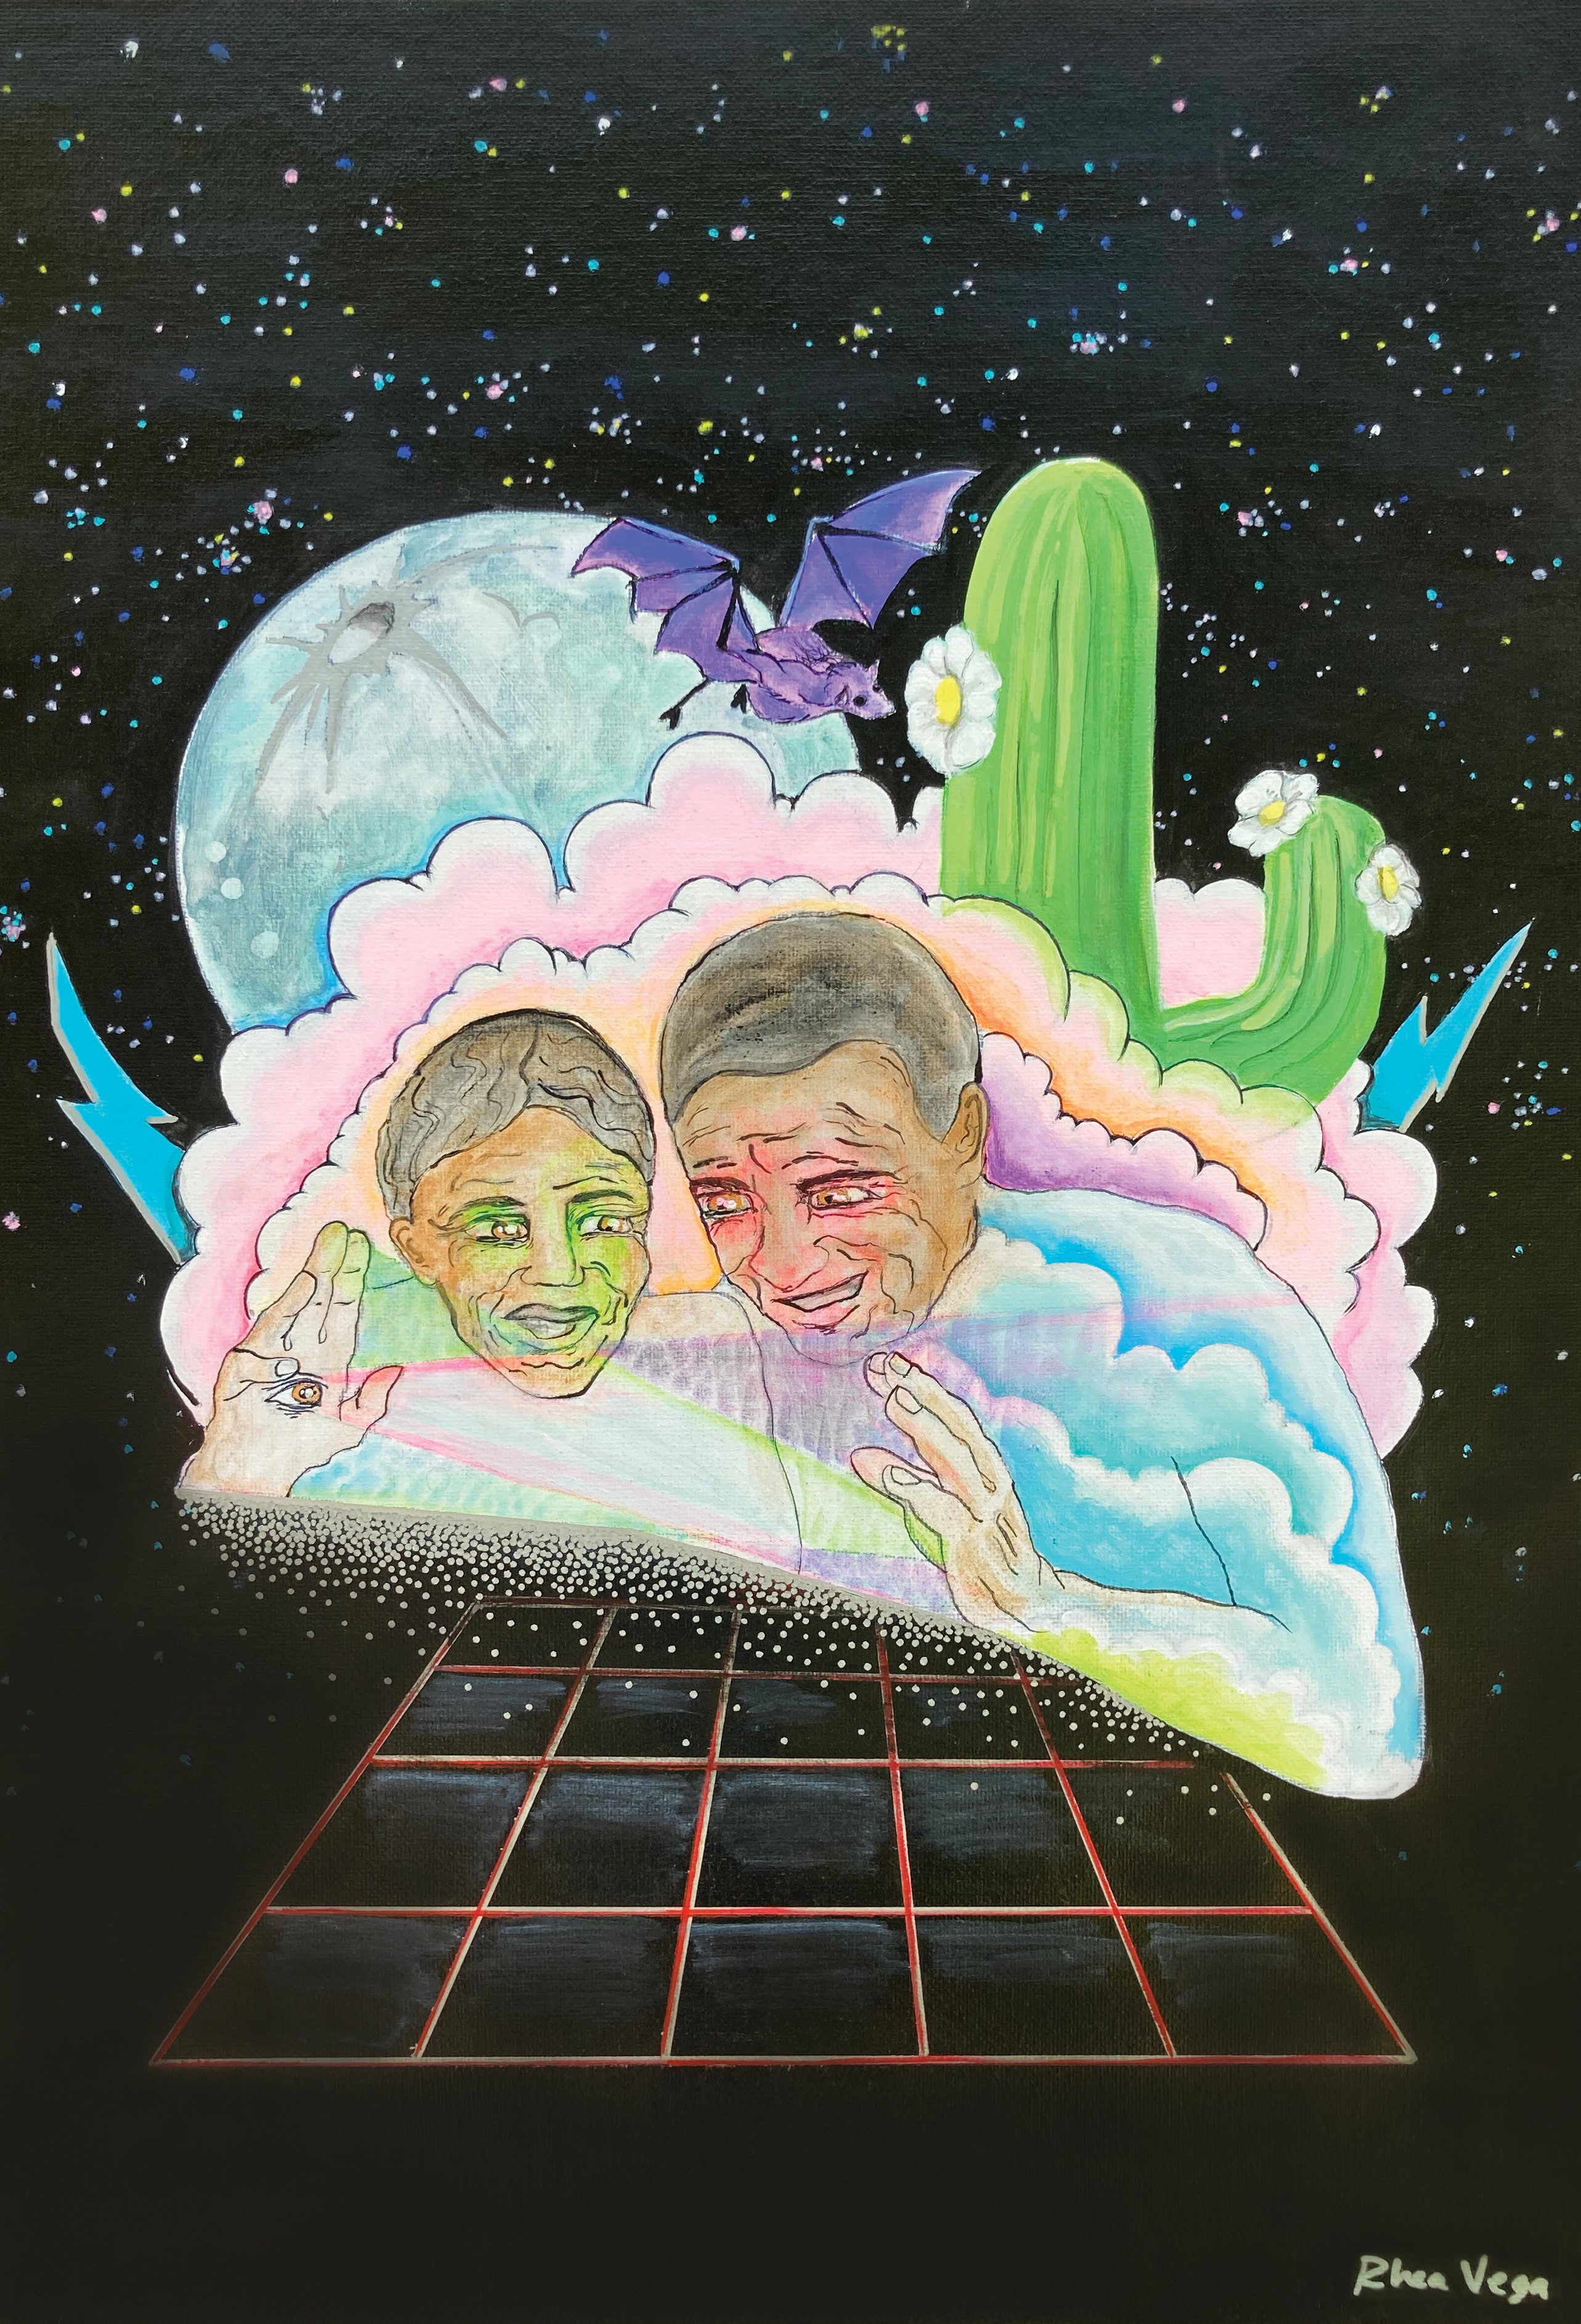 Illustration by Rhea Vega. Two older Black people face each other on a background of stars, clouds, and a flowering cactus. They appear to hover over a grid.